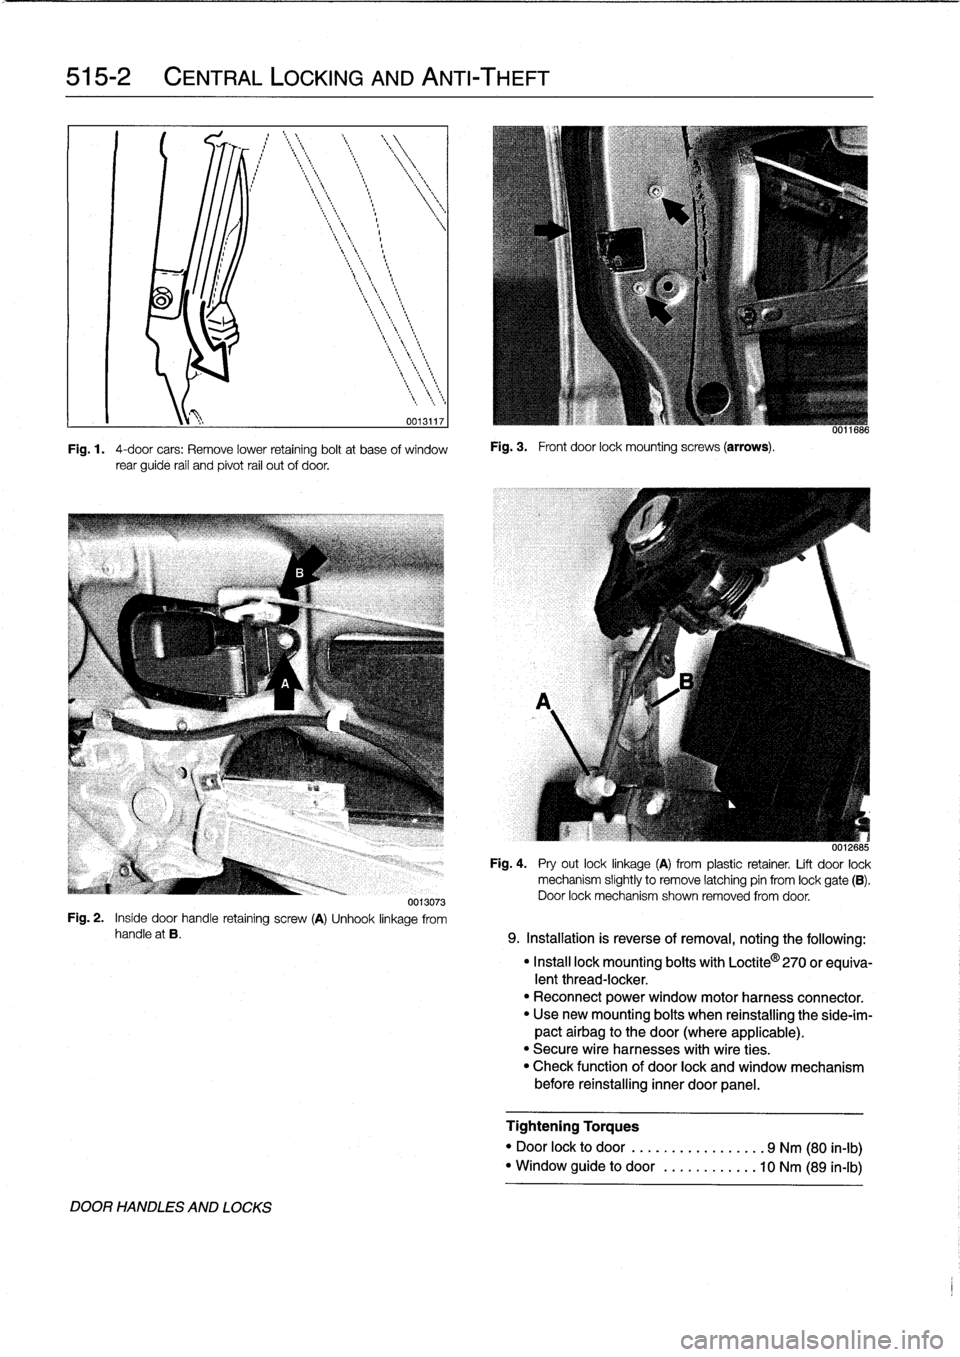 BMW M3 1998 E36 Owners Manual 
515-2

	

CENTRAL
LOCKING
AND
ANTI-THEFT

0013117

Fig
.
1
.

	

4-door
cars
:
Remove
lower
retaining
boltat
base
of
window
rear
guide
rail
and
pivot
rail
out
of
door
.

Fig
.
3
.

	

Front
door
lock